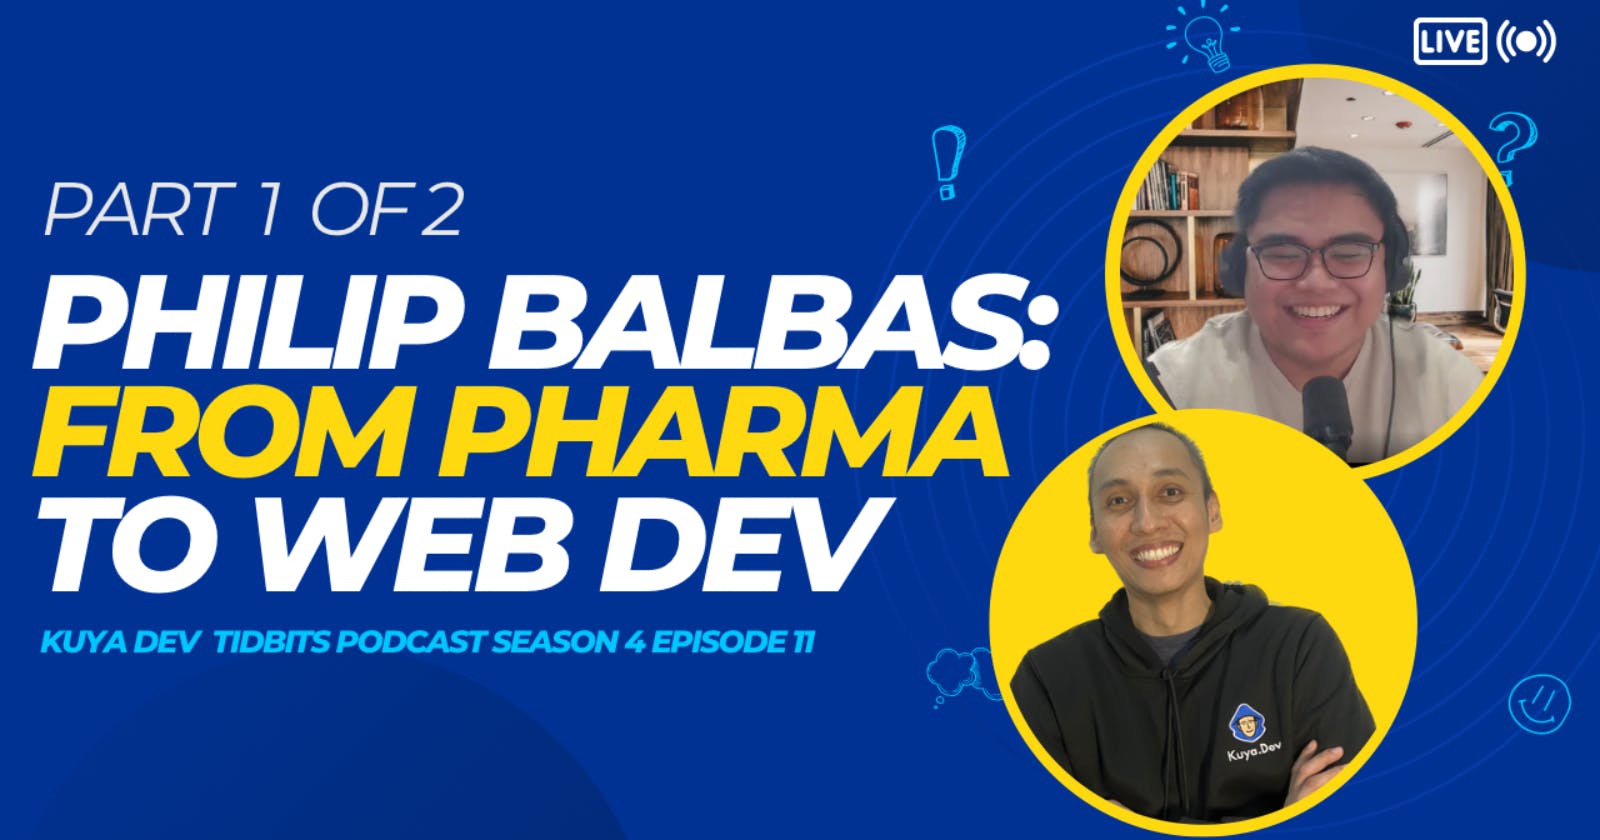 Philip Balbas: From Pharma to Web Dev (Part 1 of 2)